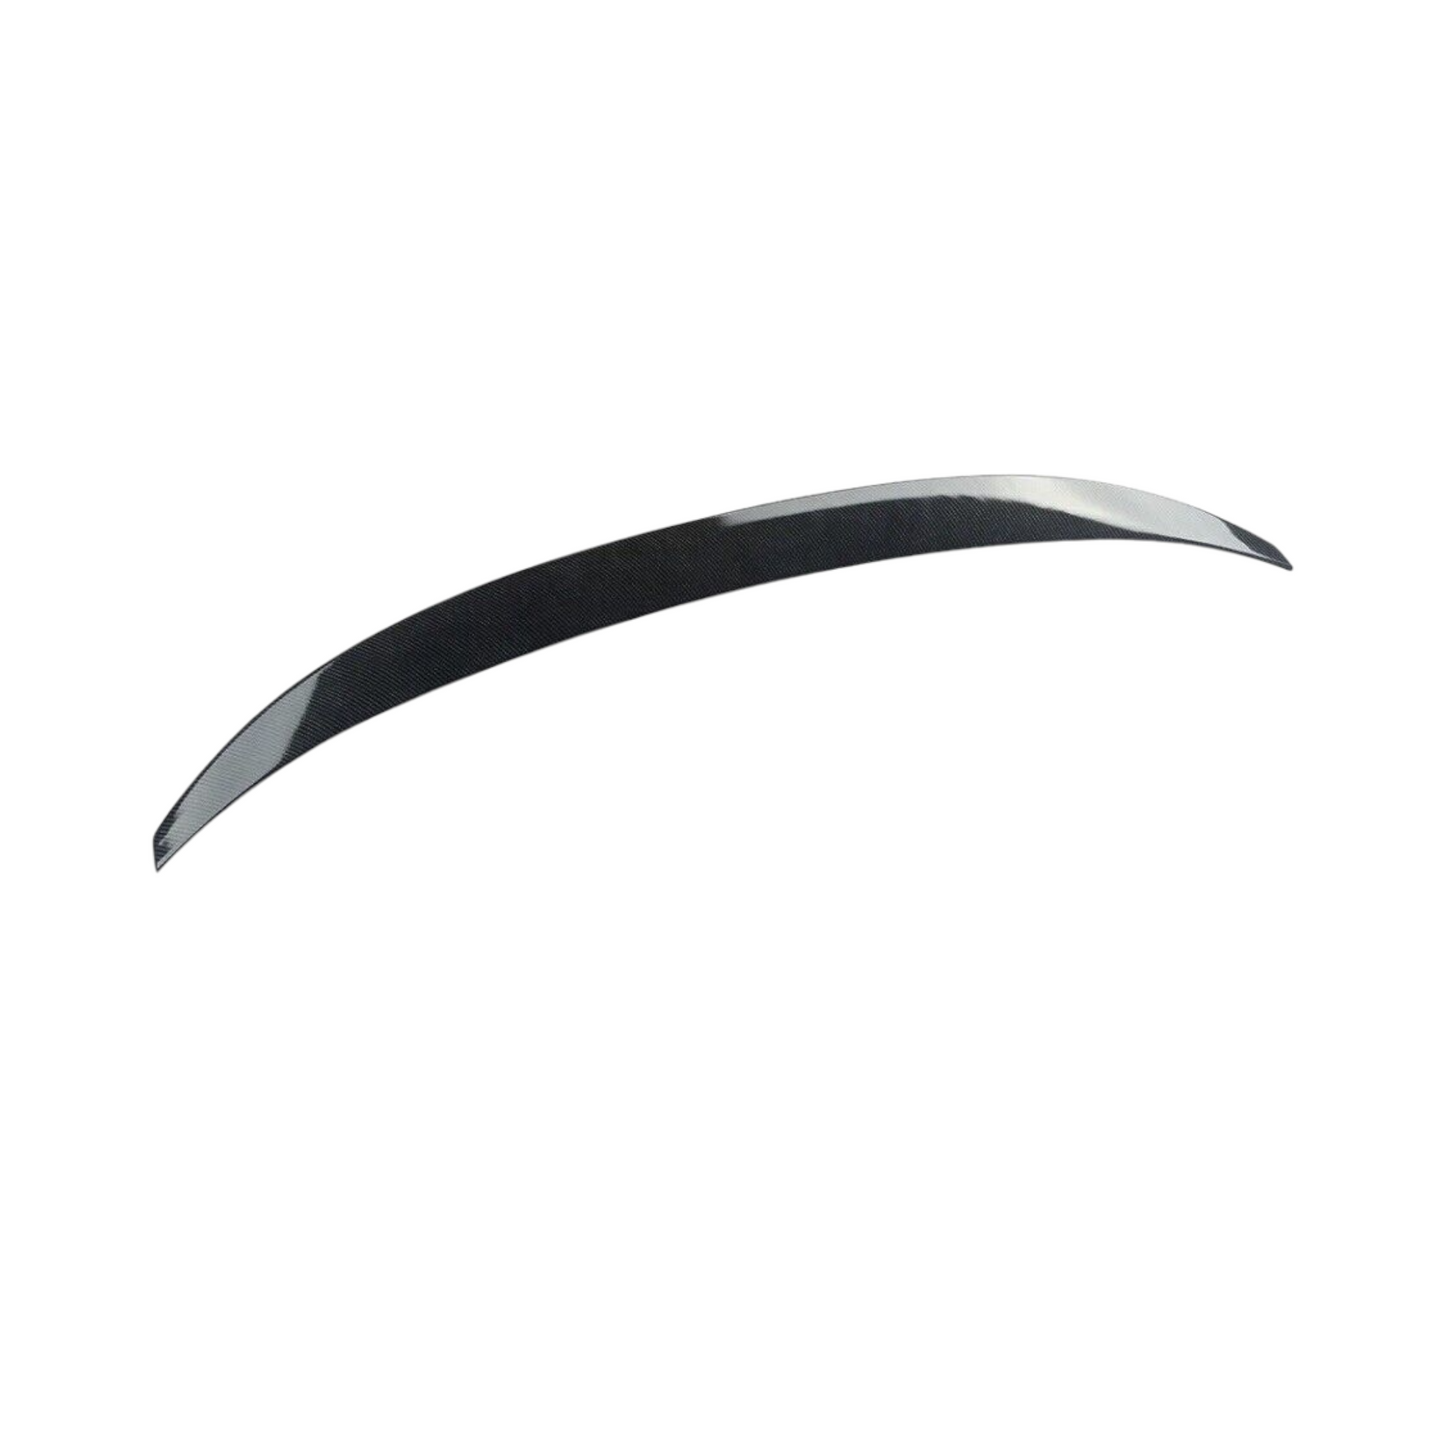 BMW 2 Series F44 Grand coupe Boot spoiler Gloss black - BMW Body Kits Performance Styling